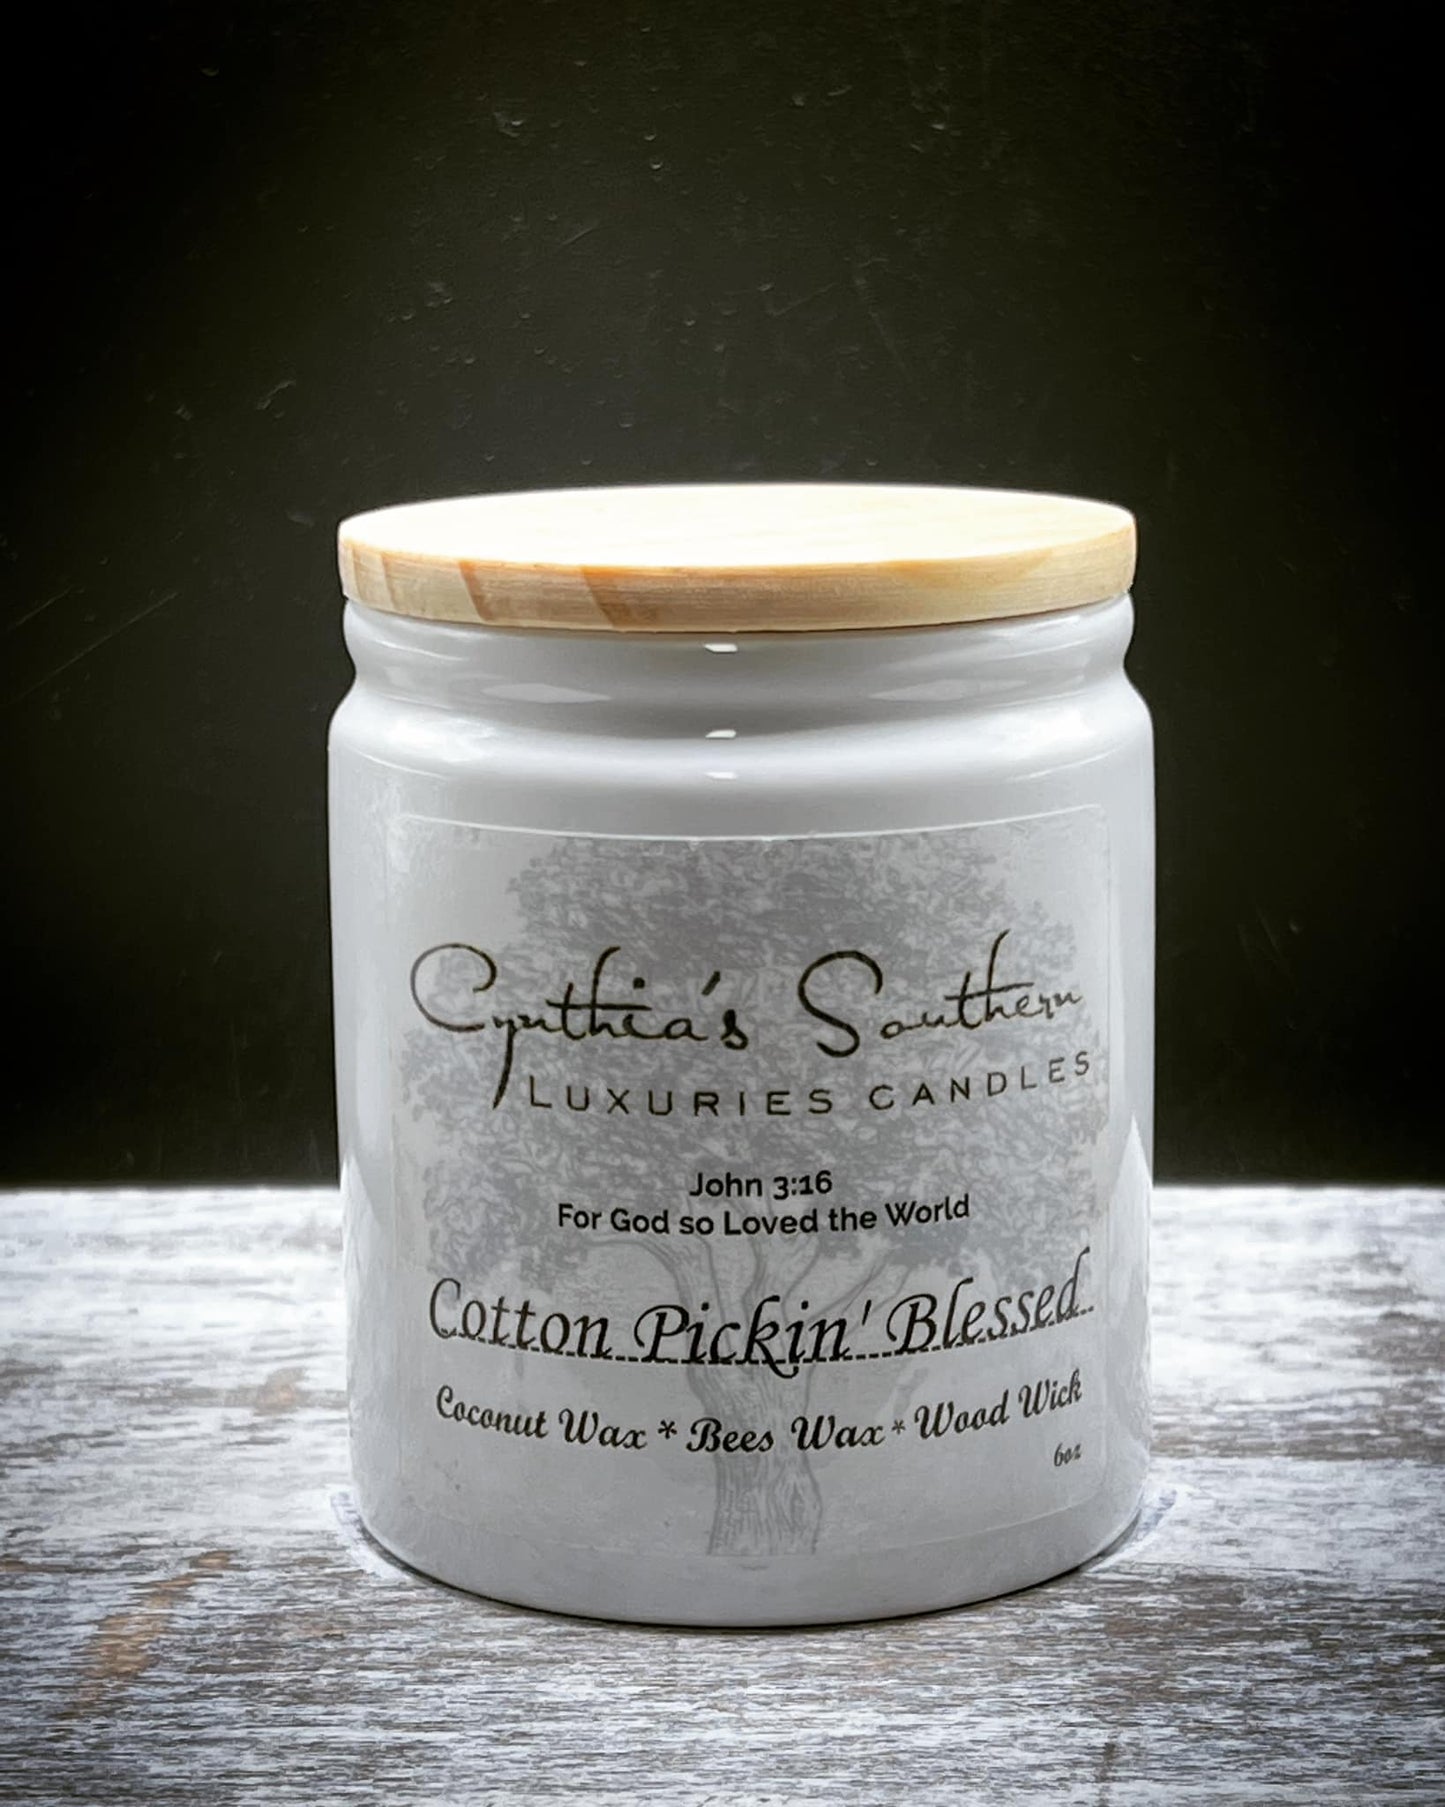 Cotton Pickin’ Blessed Candle